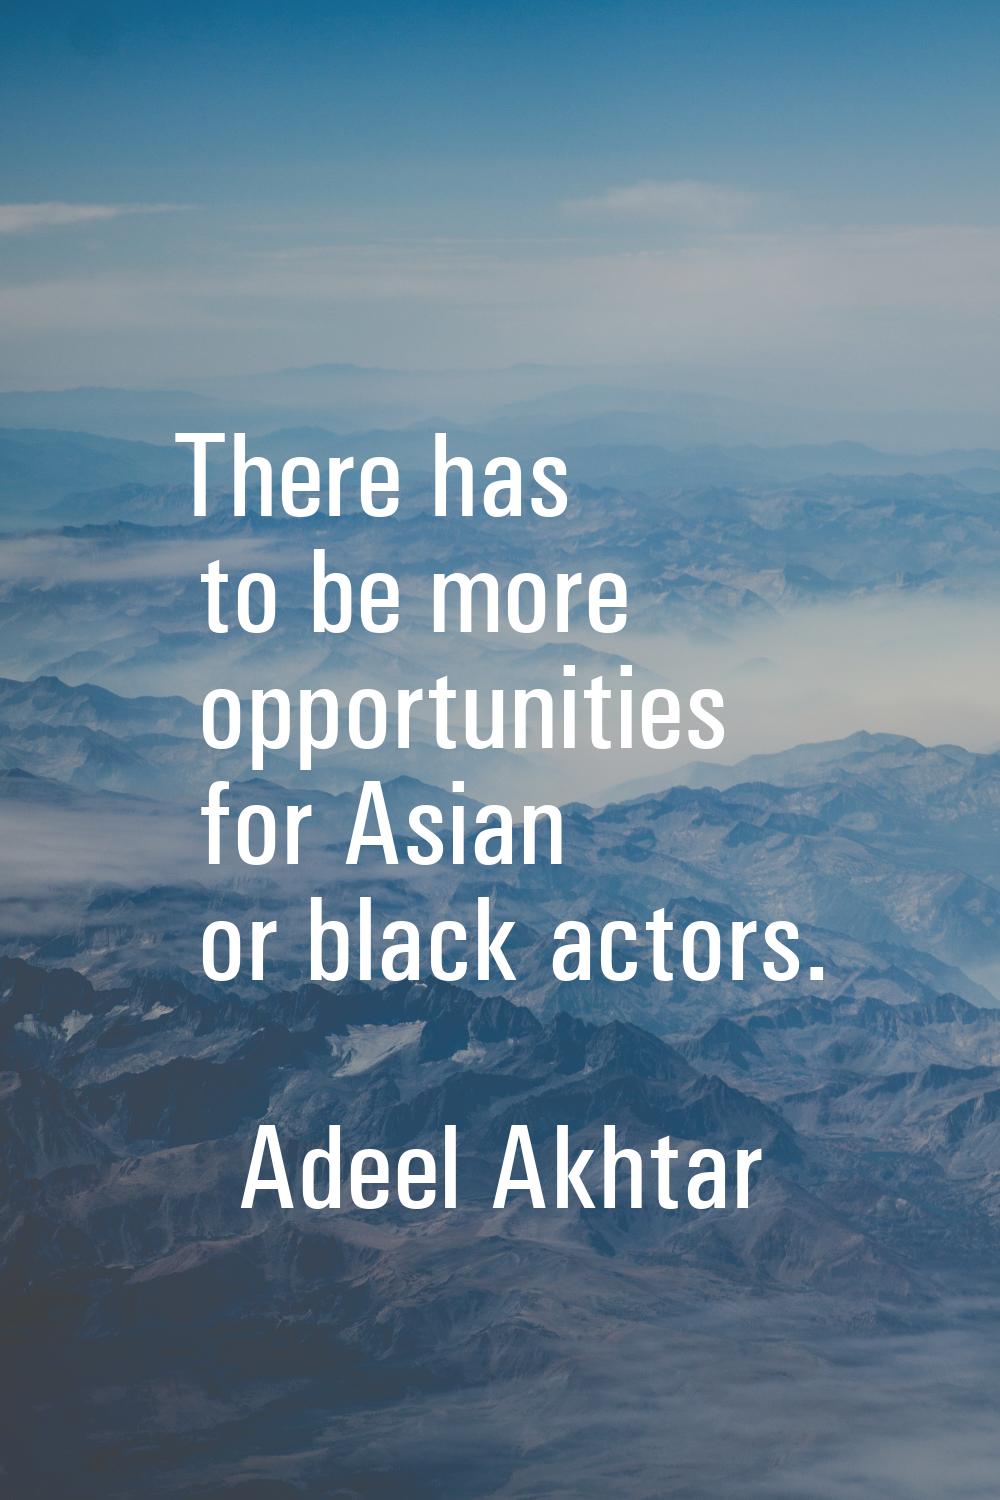 There has to be more opportunities for Asian or black actors.